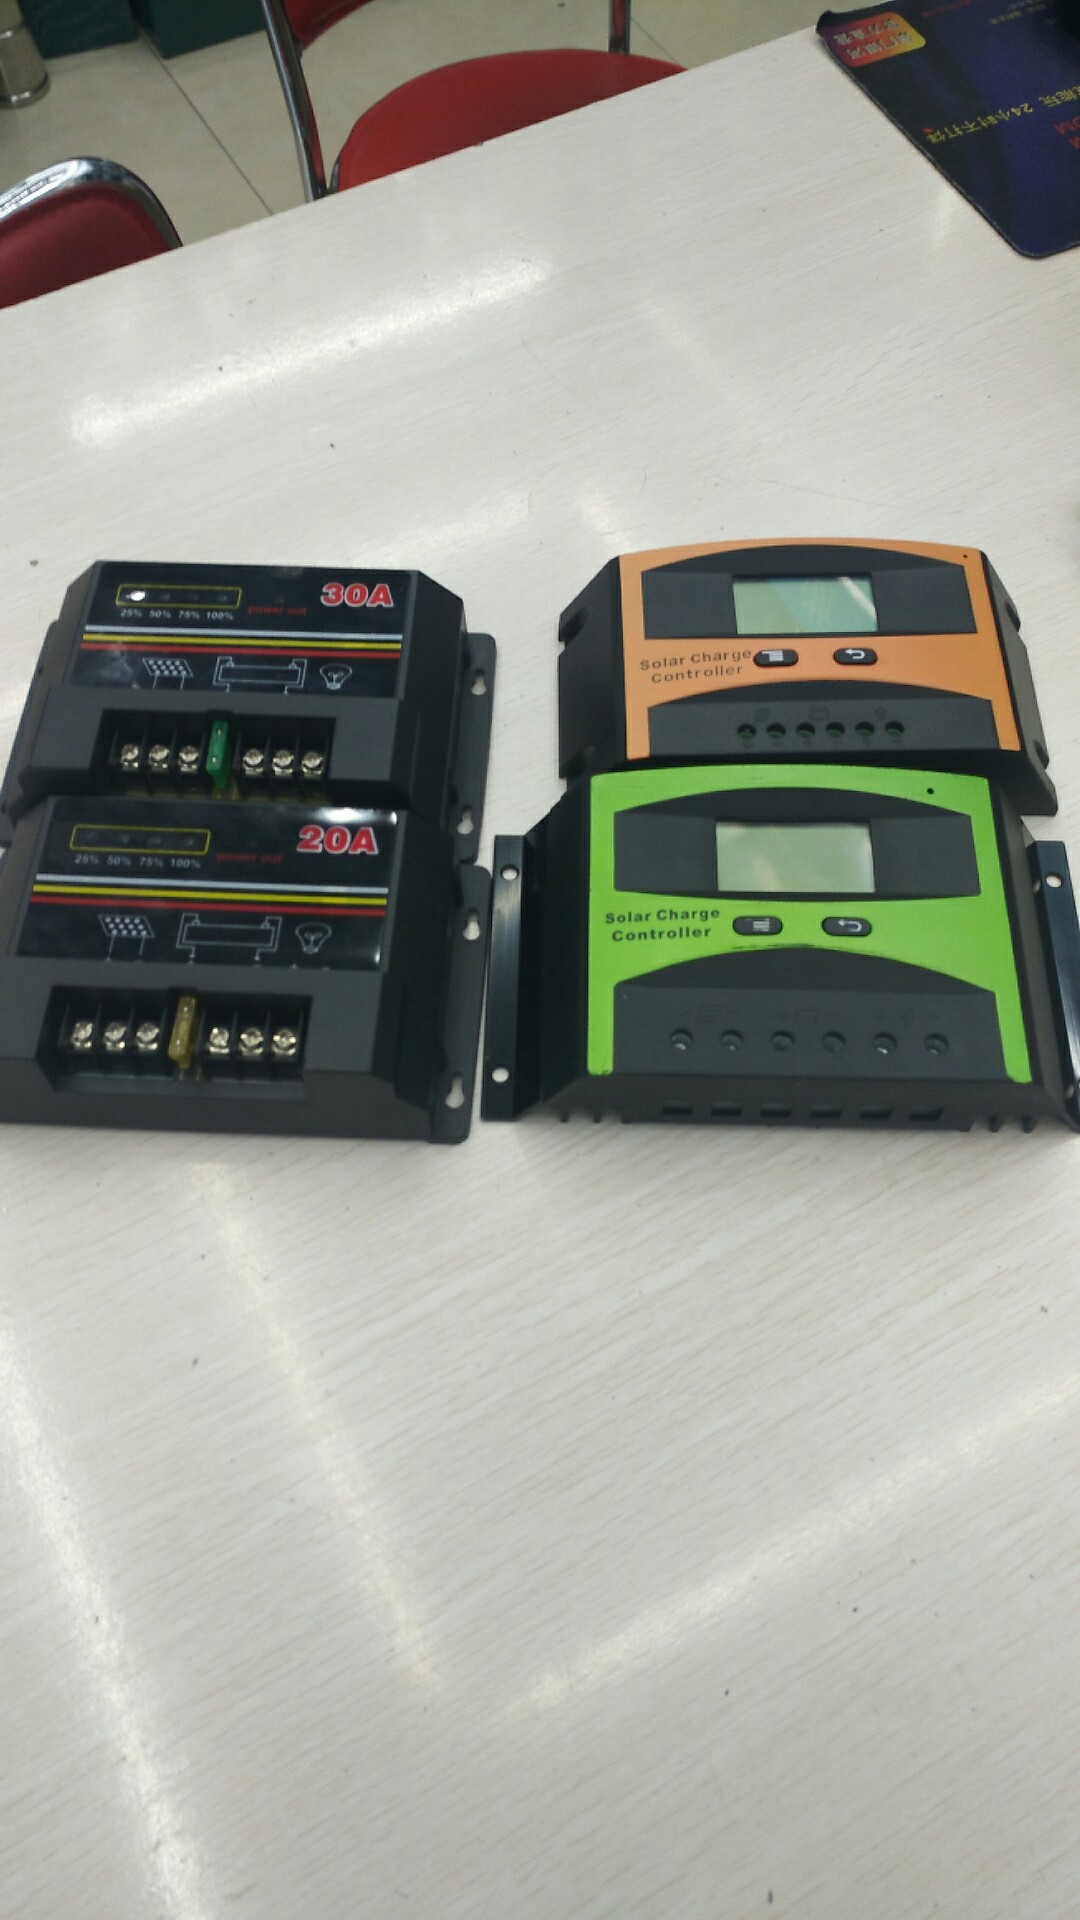 Solar charge controller产品图